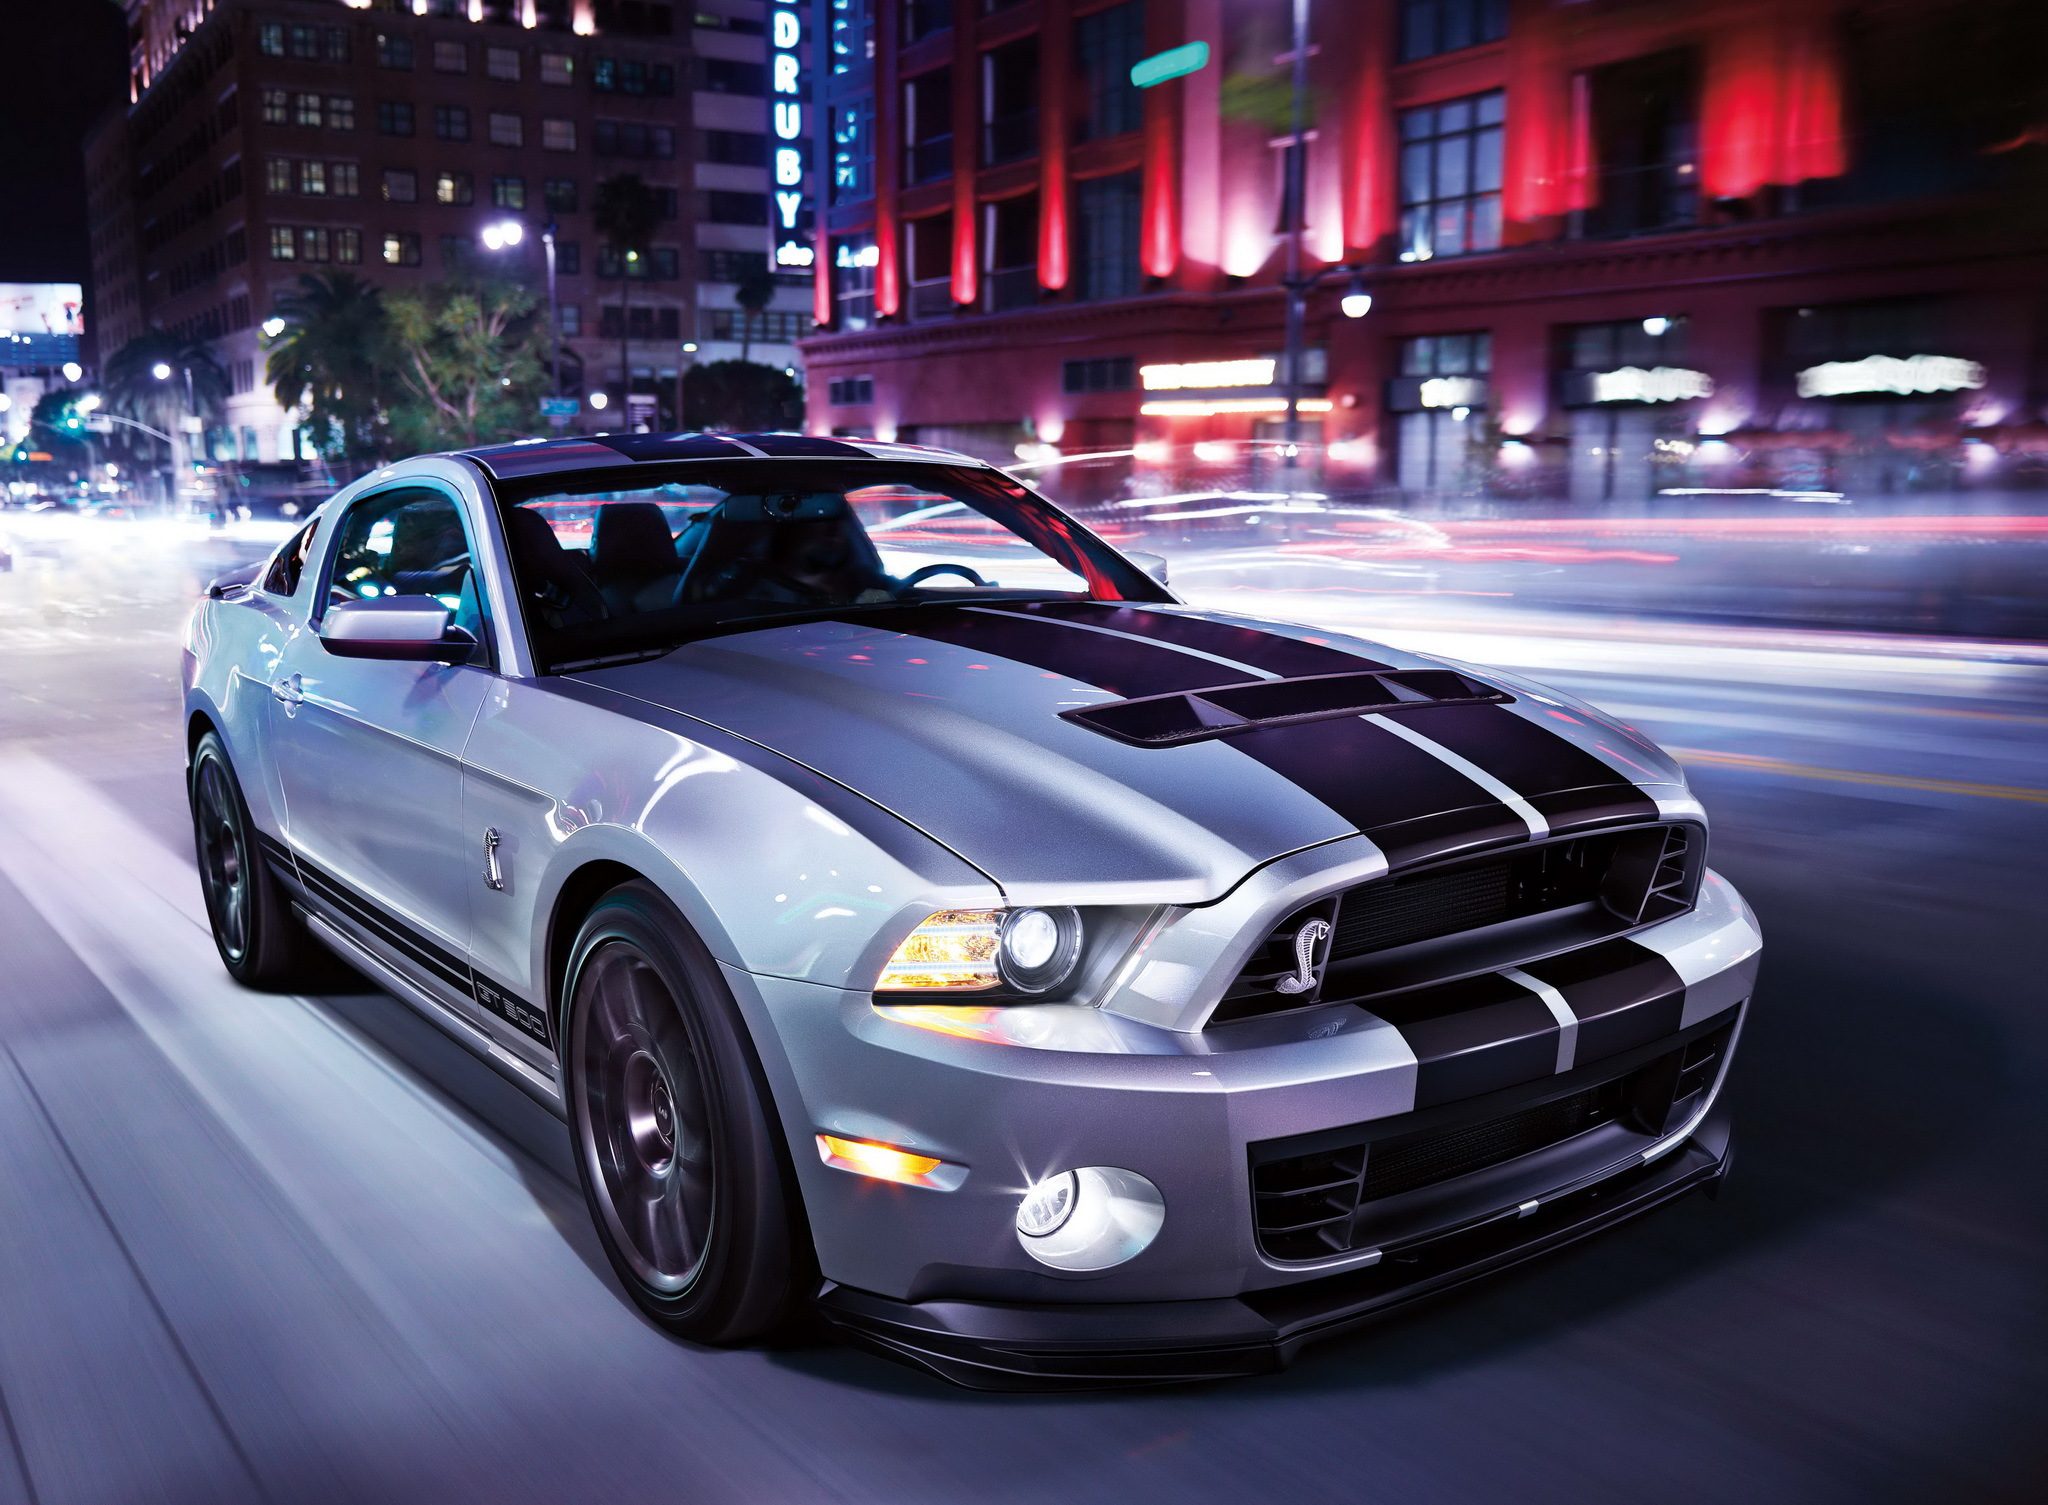 Ford Mustang Shelby Gt500 Svt Wallpapers